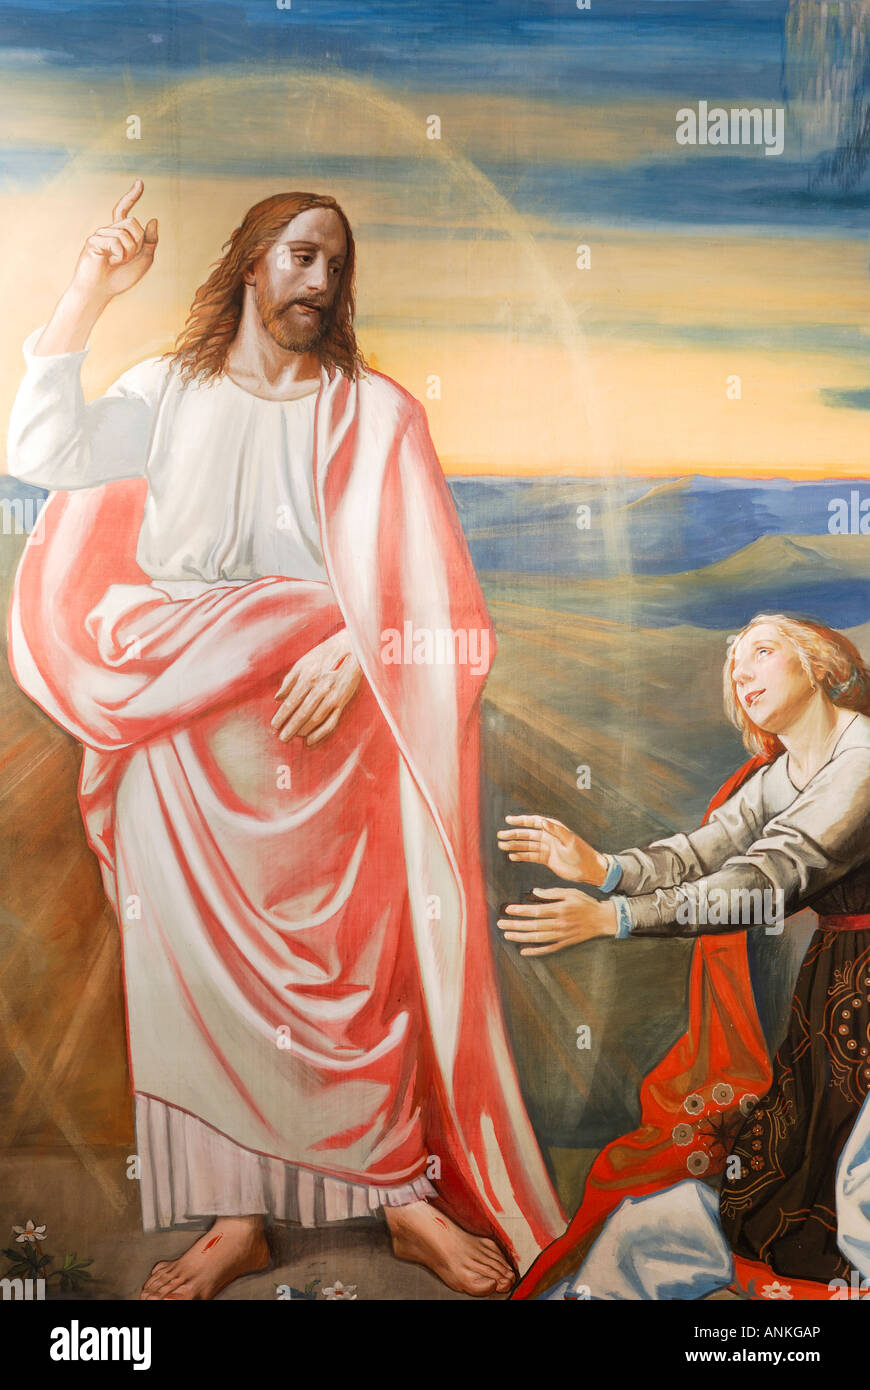 Mural painting of Jesus at resurrection Stock Photo